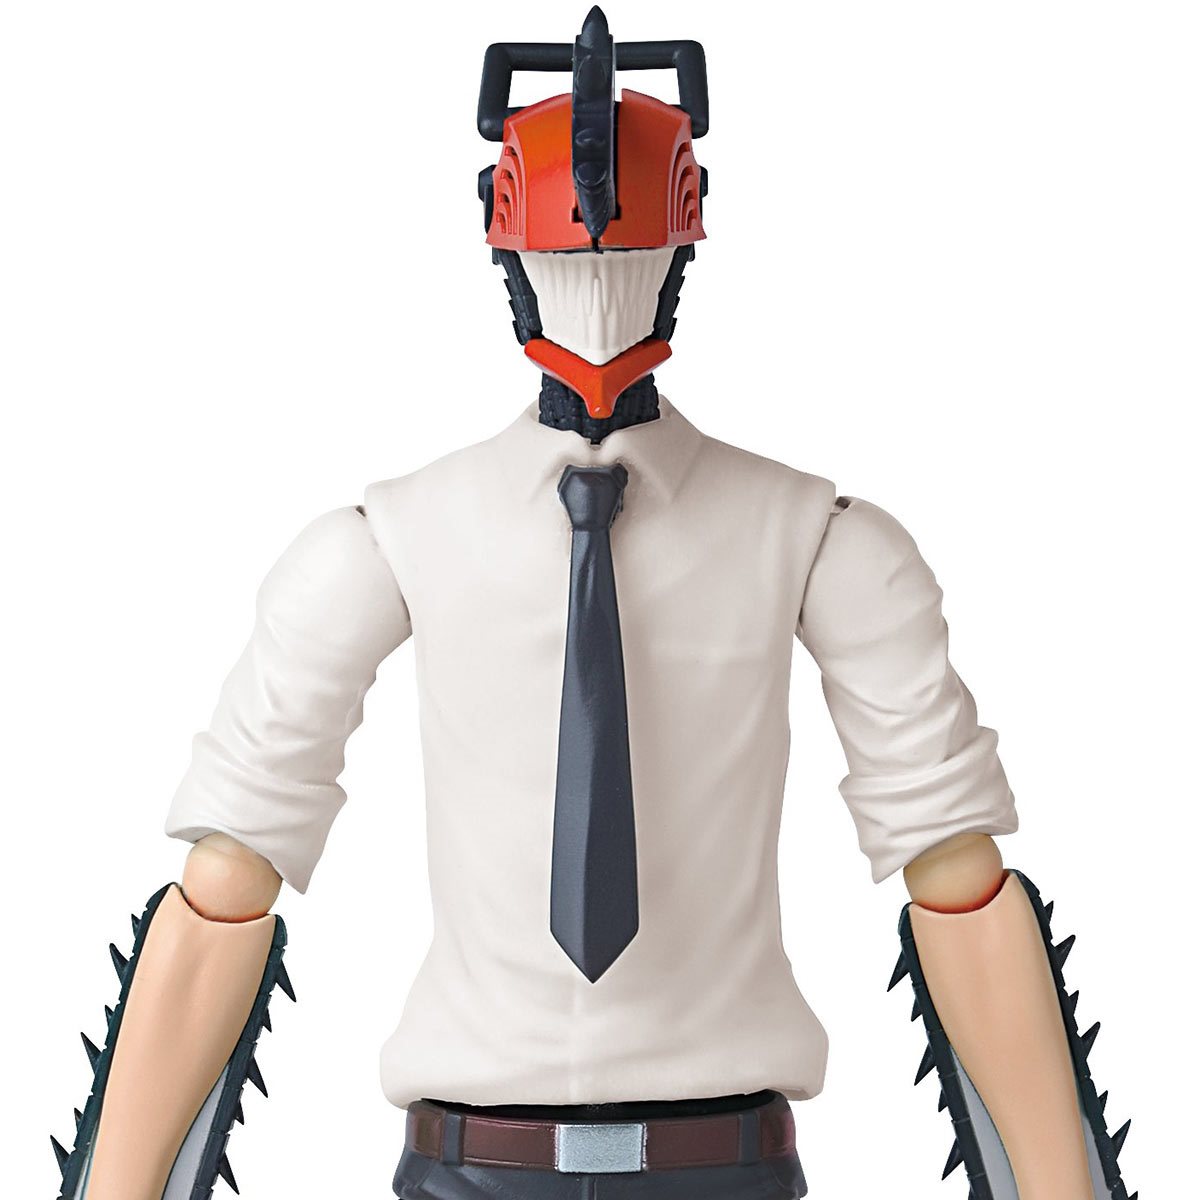 Chainsaw Man - Chainsaw Man Anime Heroes Action Figure